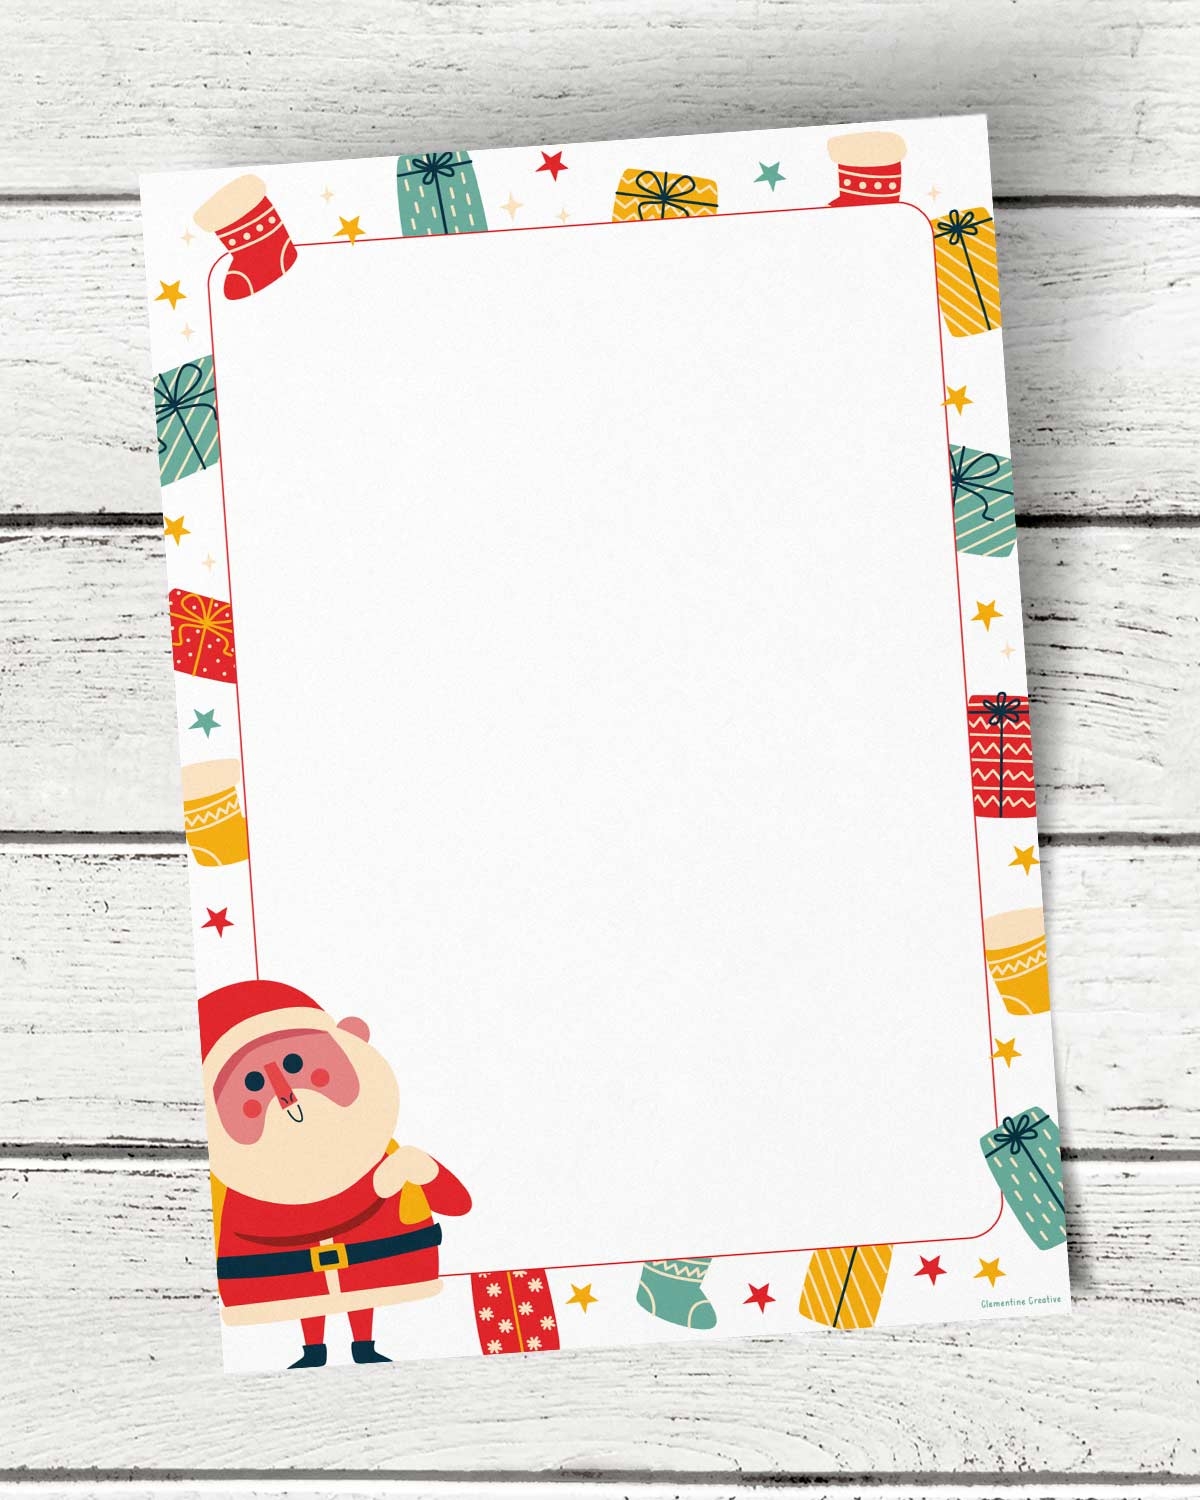 7 Cute Christmas Border Papers Free Printable Templates Clementine Creative - Free Printable Christmas Border Paper